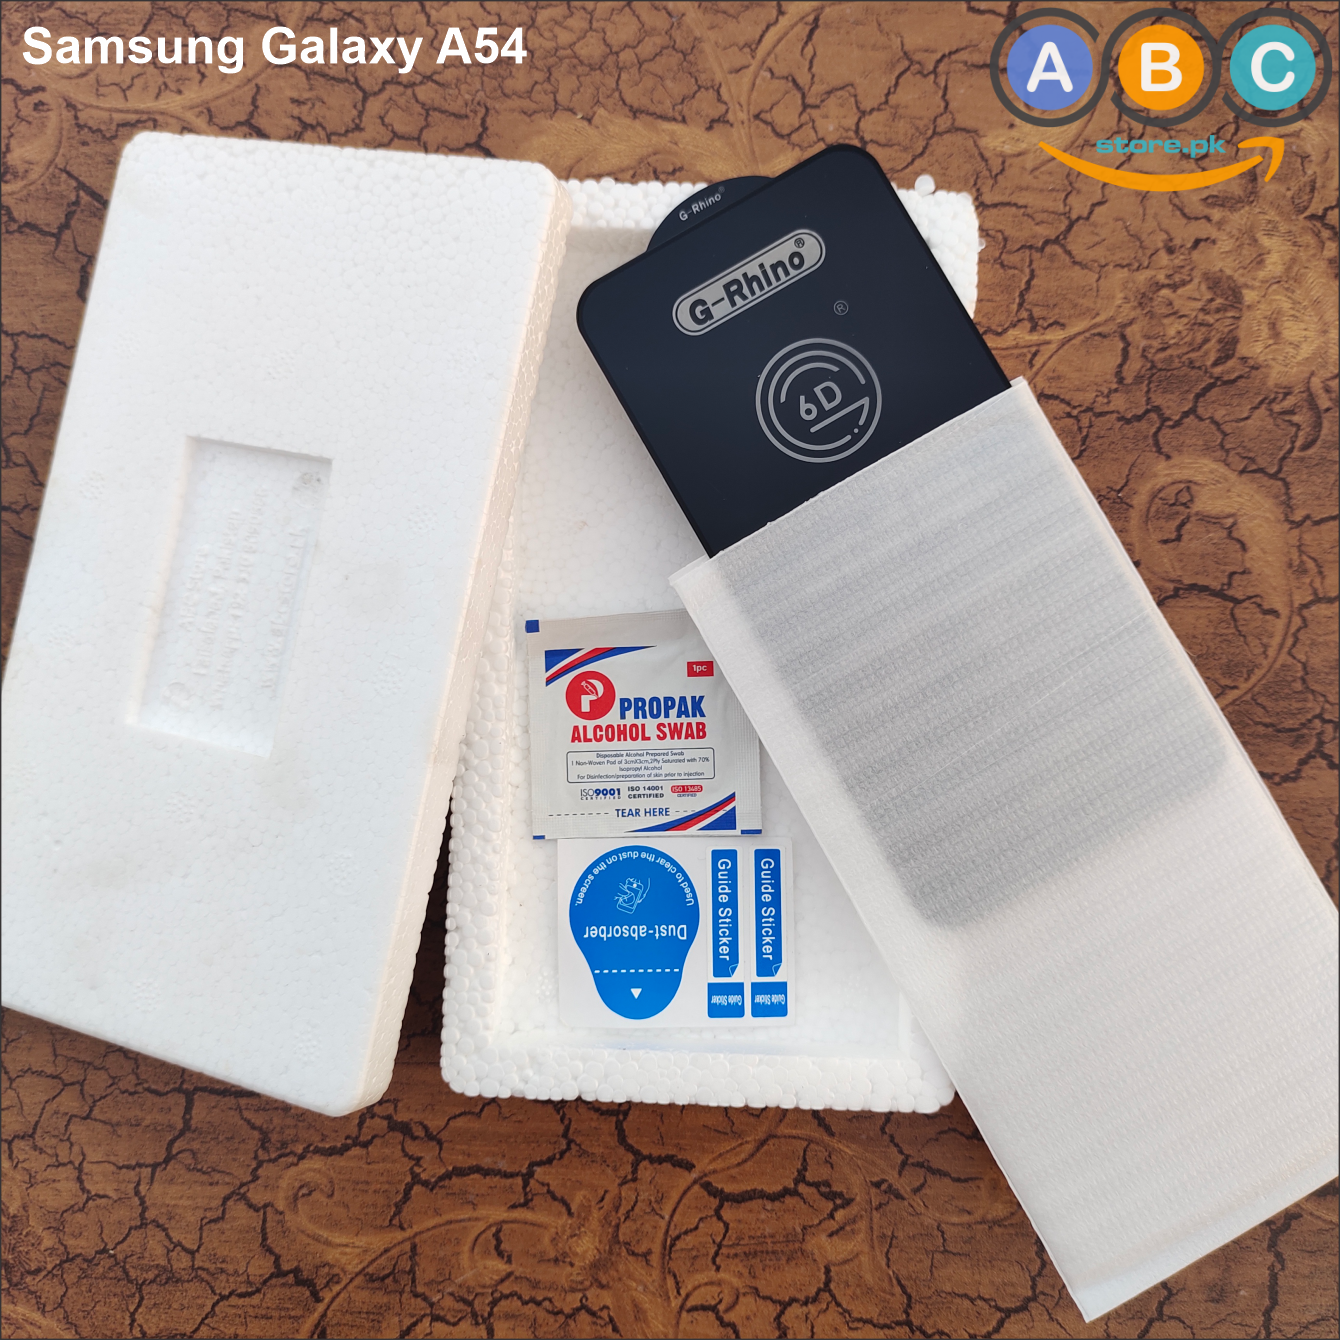 Samsung Galaxy A54, HD Tempered Glass Screen Protector